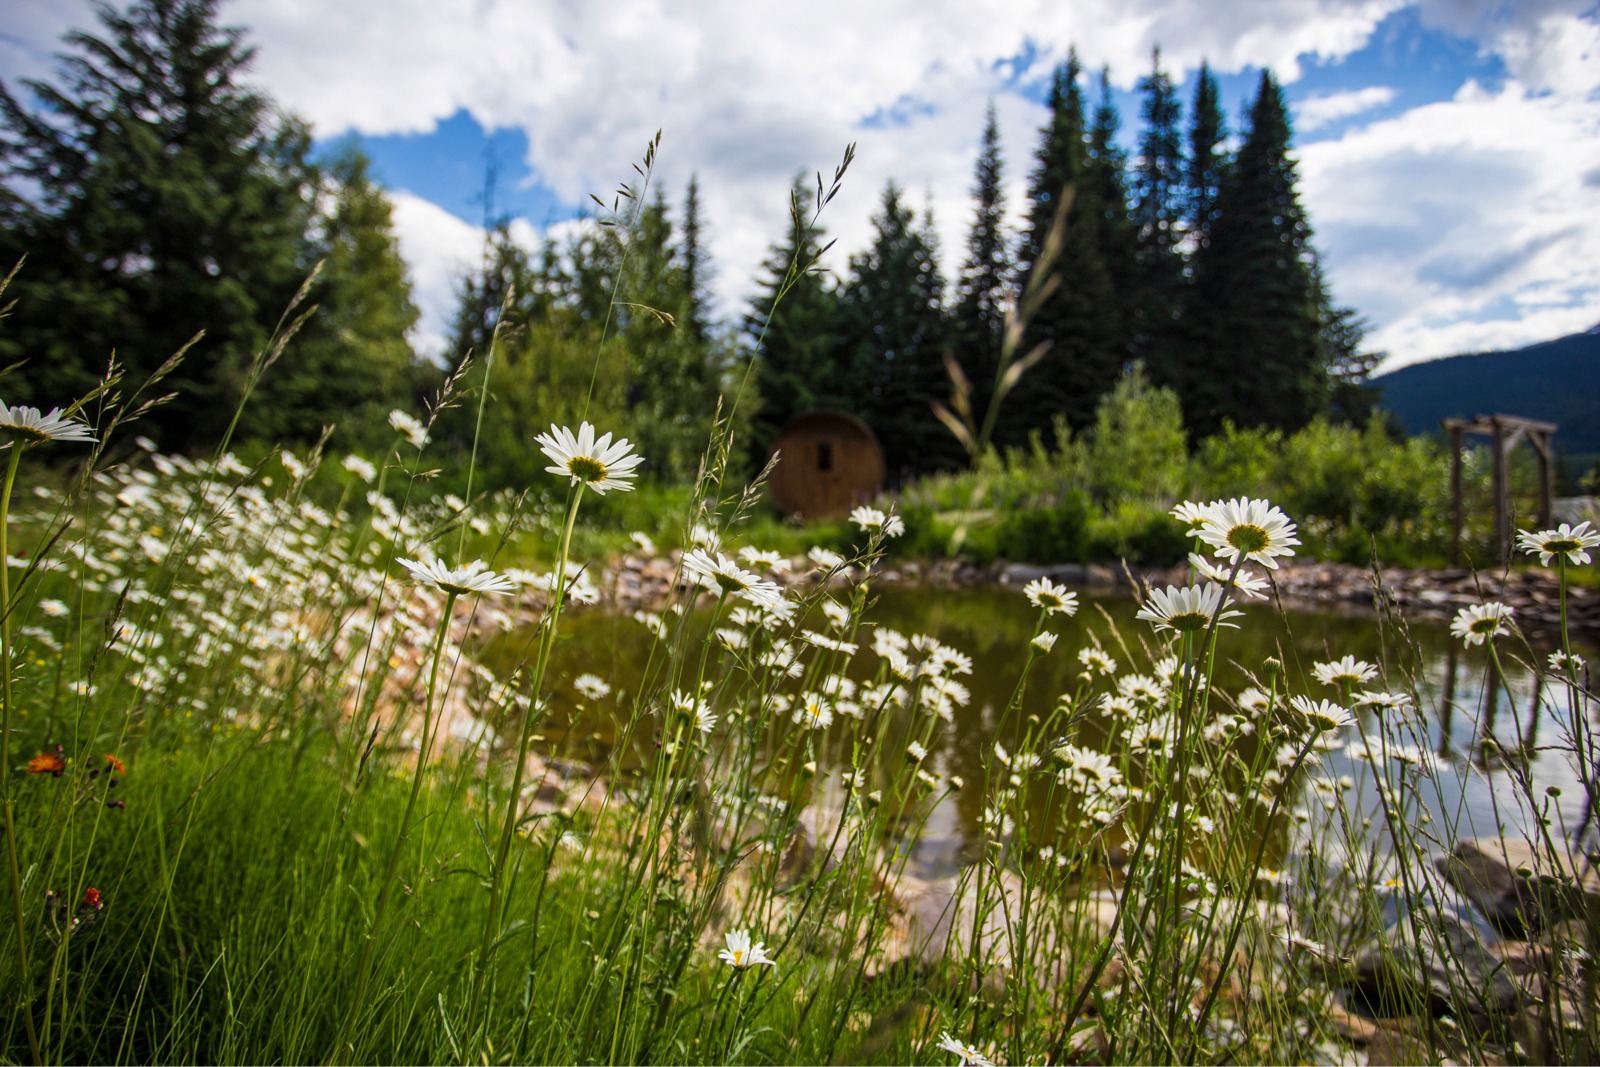 White daisies near water with cabin in background amongst the woods